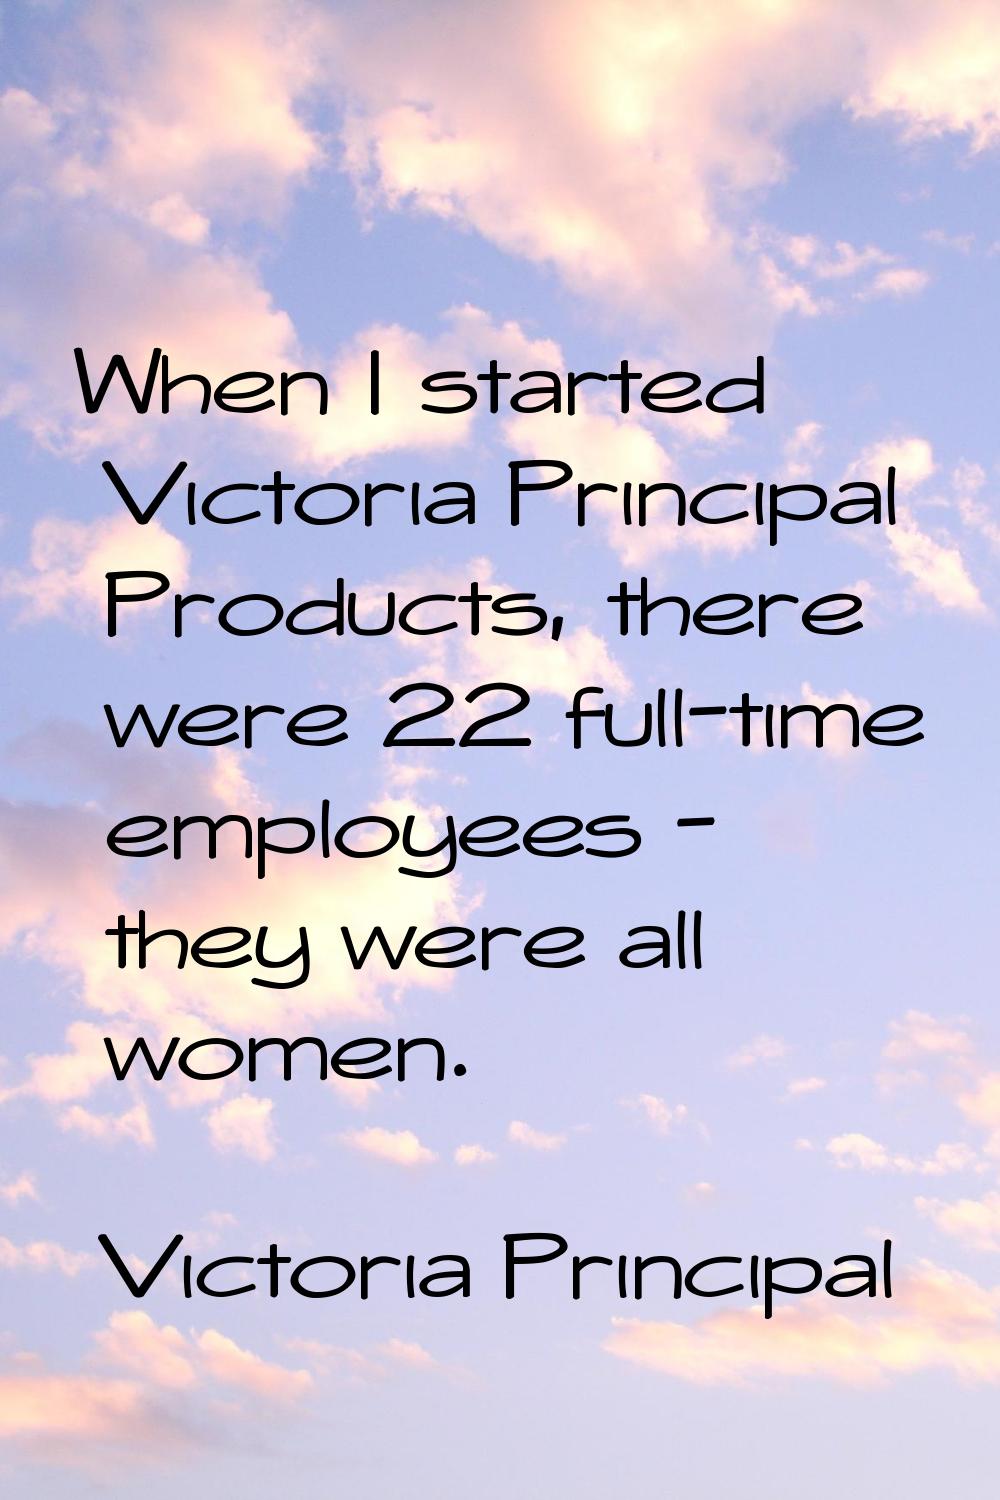 When I started Victoria Principal Products, there were 22 full-time employees - they were all women